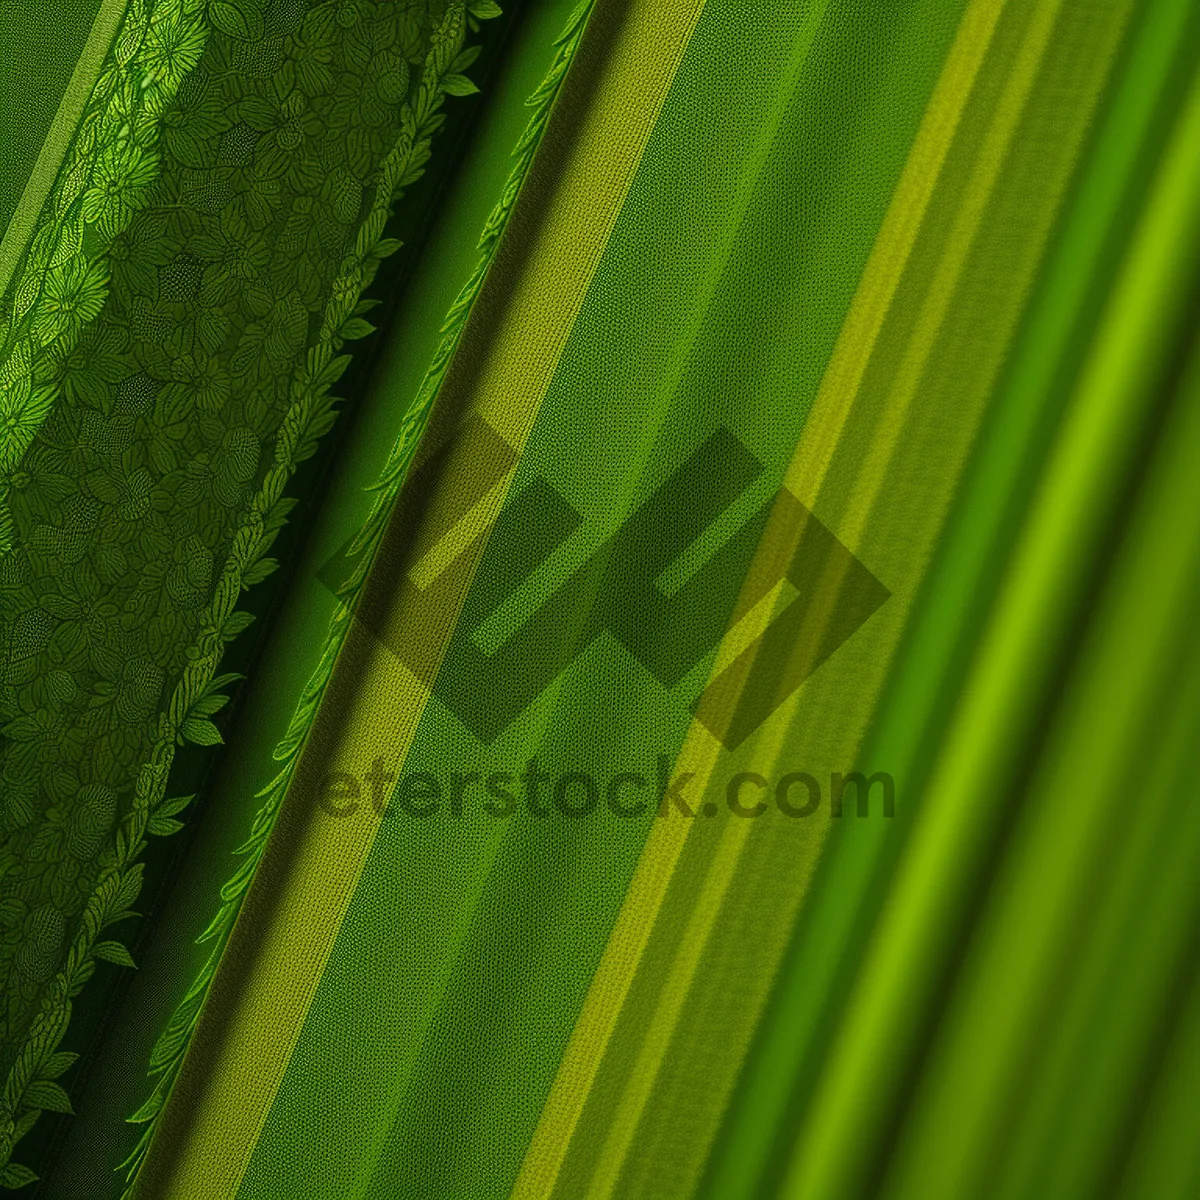 Picture of Vibrant Summer Bamboo Leaf in Dewy Garden